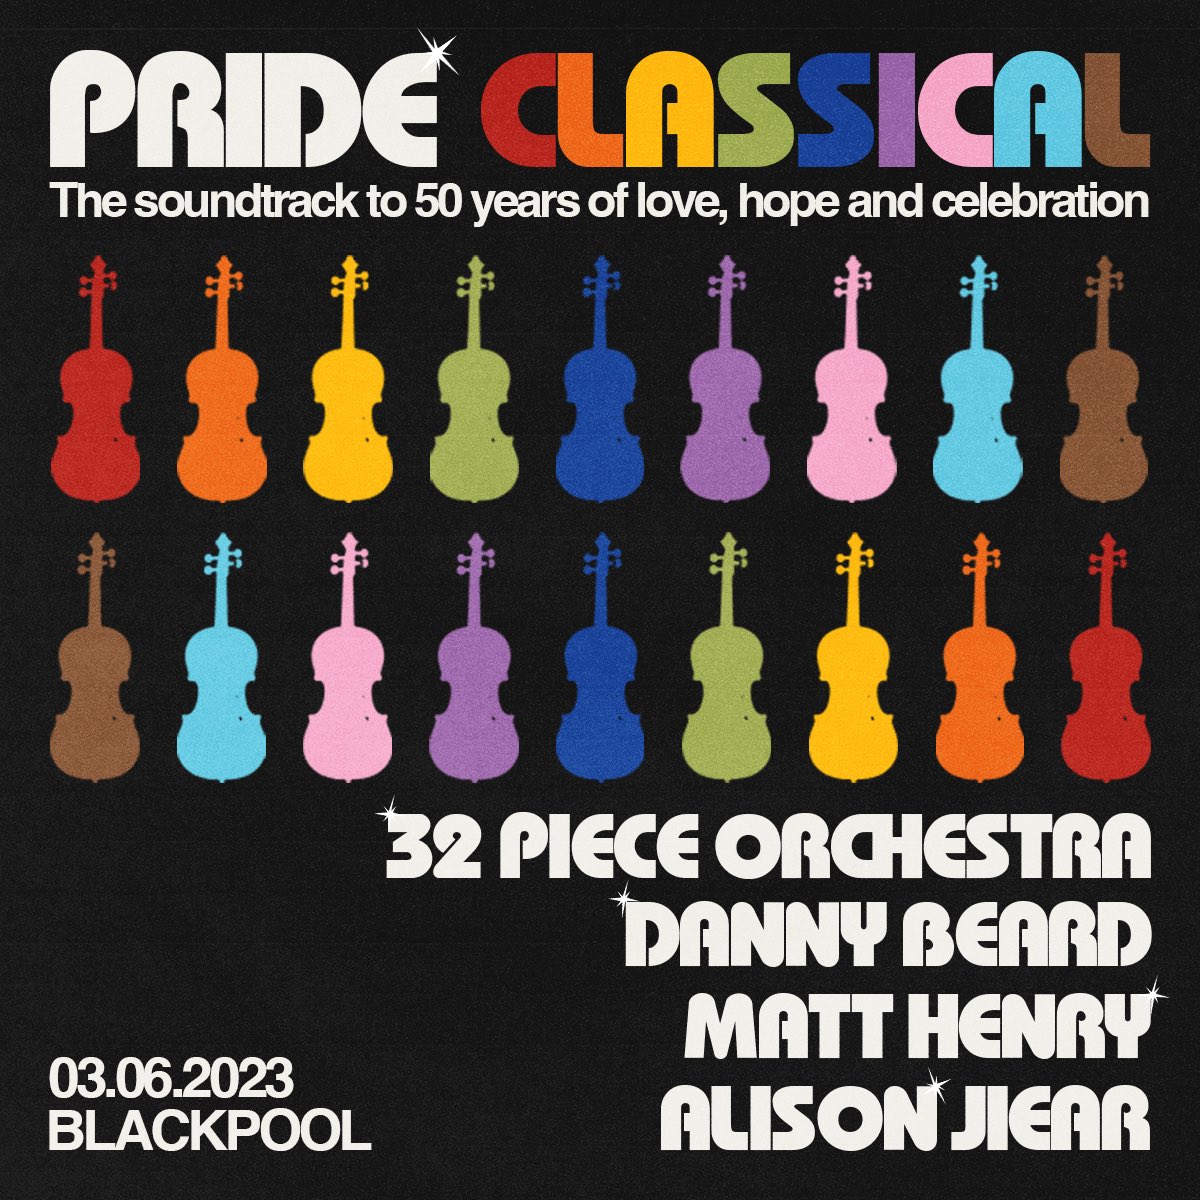 We’re at The Blackpool Tower Ballroom on Saturday 3rd June 2023. We’re thrilled to be teaming up with Blackpool Pride to kick off Summer Pride 2023. We’re offering 30% off Pride Classical tickets to anyone who purchases a Summer Pride ticket. Tickets: prideblackpool.co.uk 🎟️